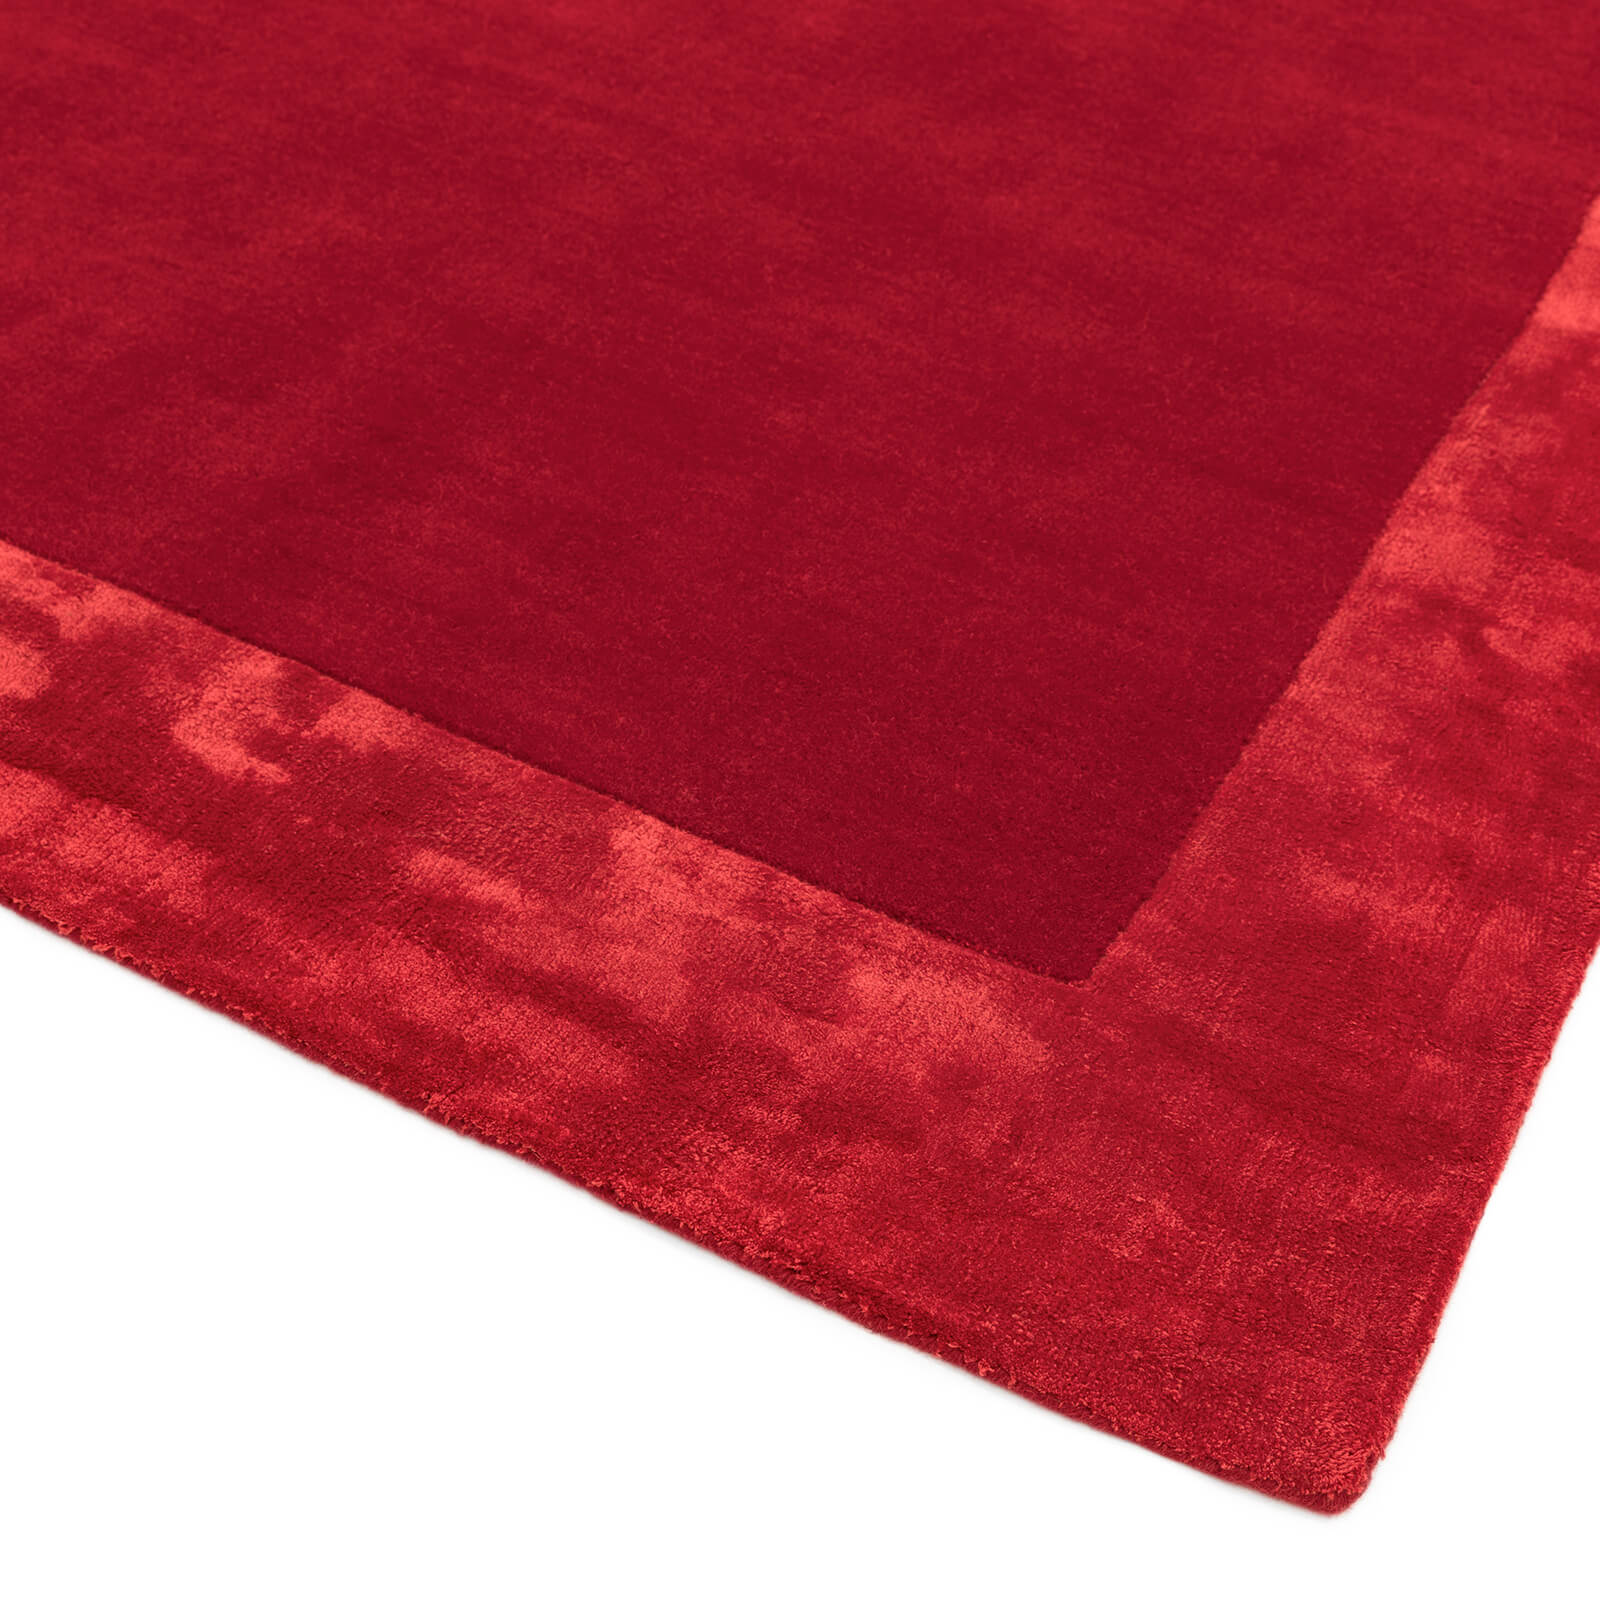 Asiatic Ascot Red Rug